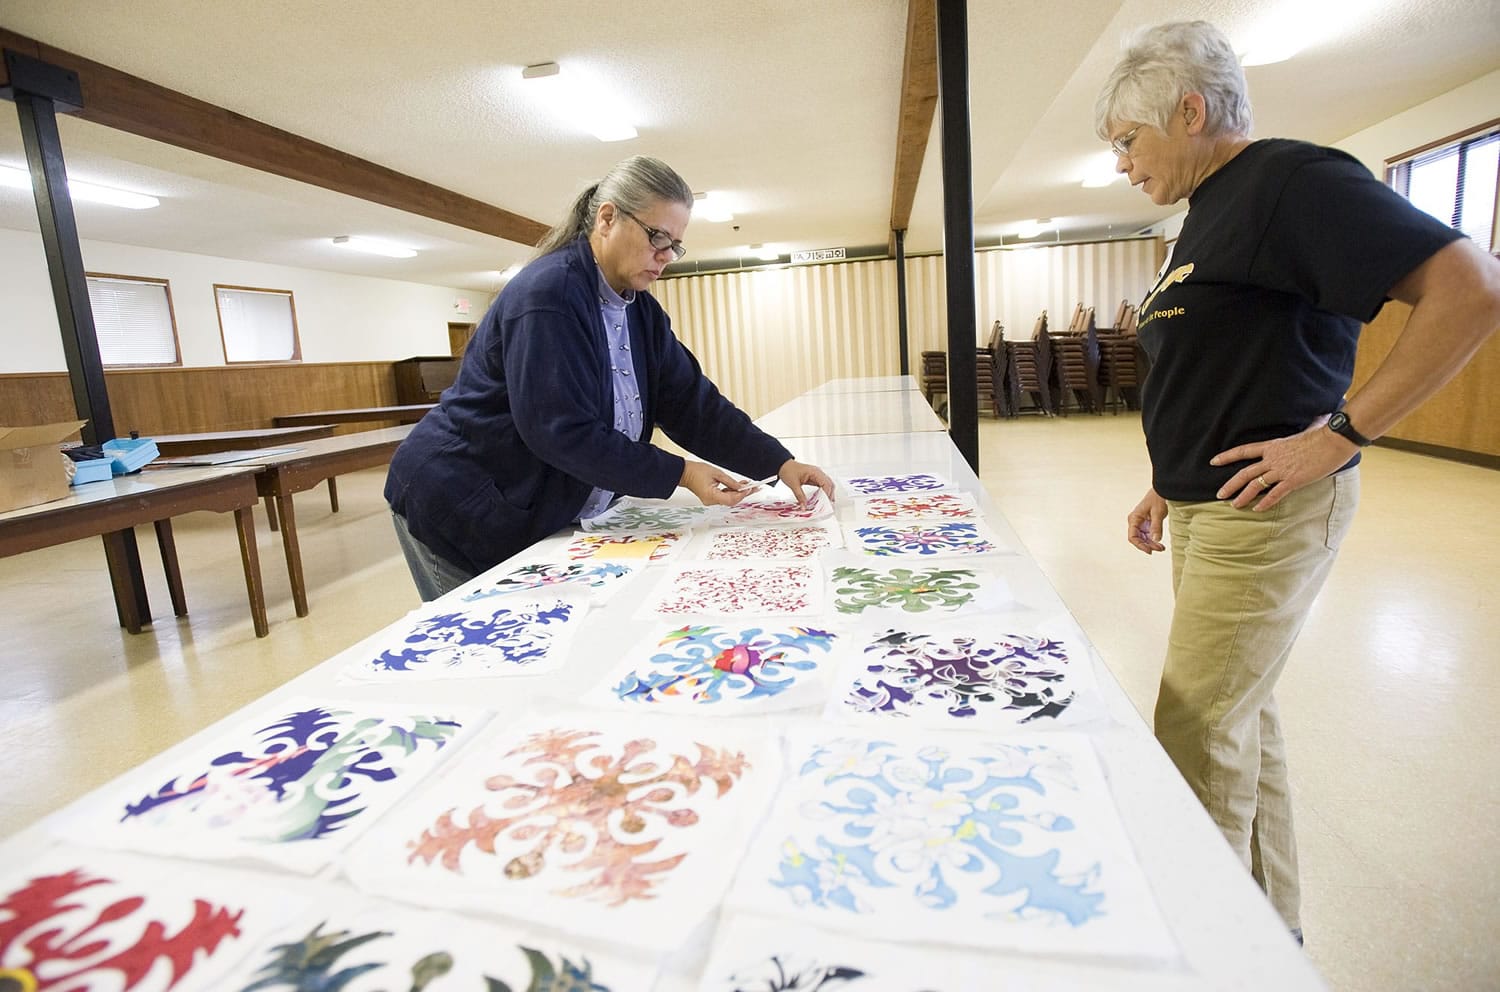 Mary Myers, 62, from Camas, left, and Toni Kapitanovich, 65, from Battle Ground, plan a quilting project at the Washington Grange No.